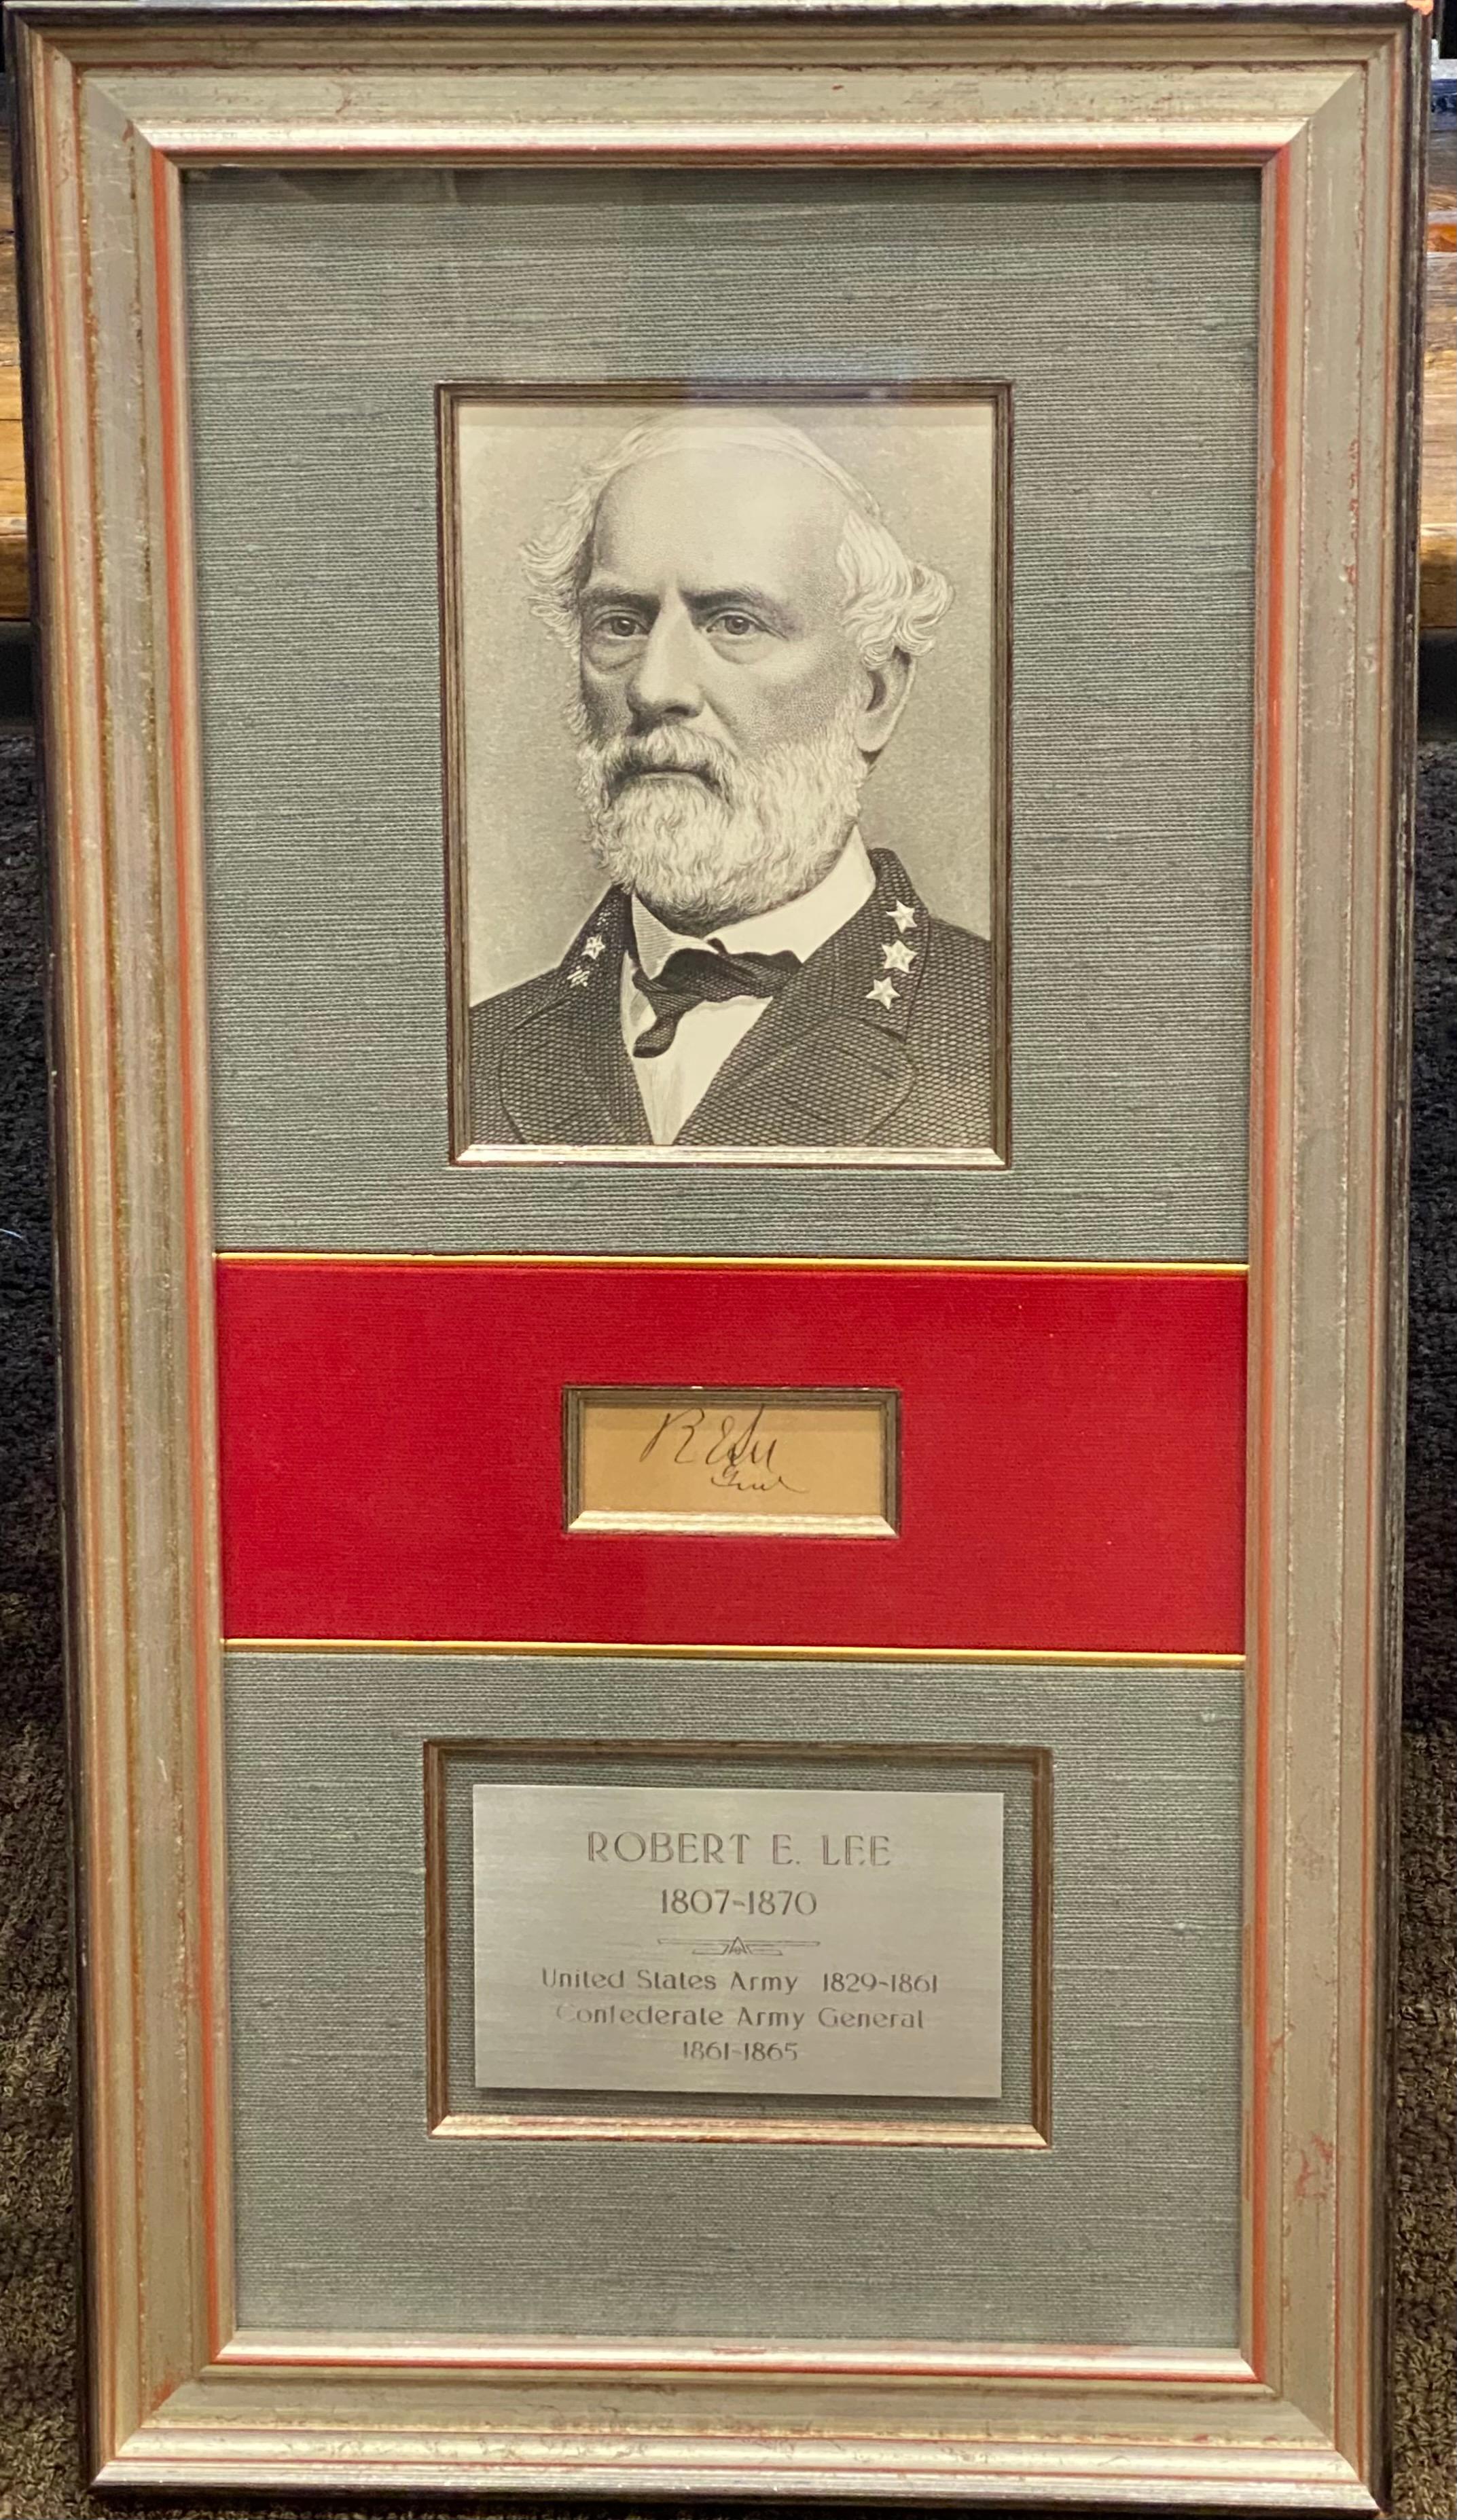 Presented is a rare autographed collage celebrating Confederate Army General Robert E. Lee. The collage features Lee's autograph at center. Boldly signed on tan paper, the signature reads, “R.E. Lee Genl.”

This is a rare and desirable large